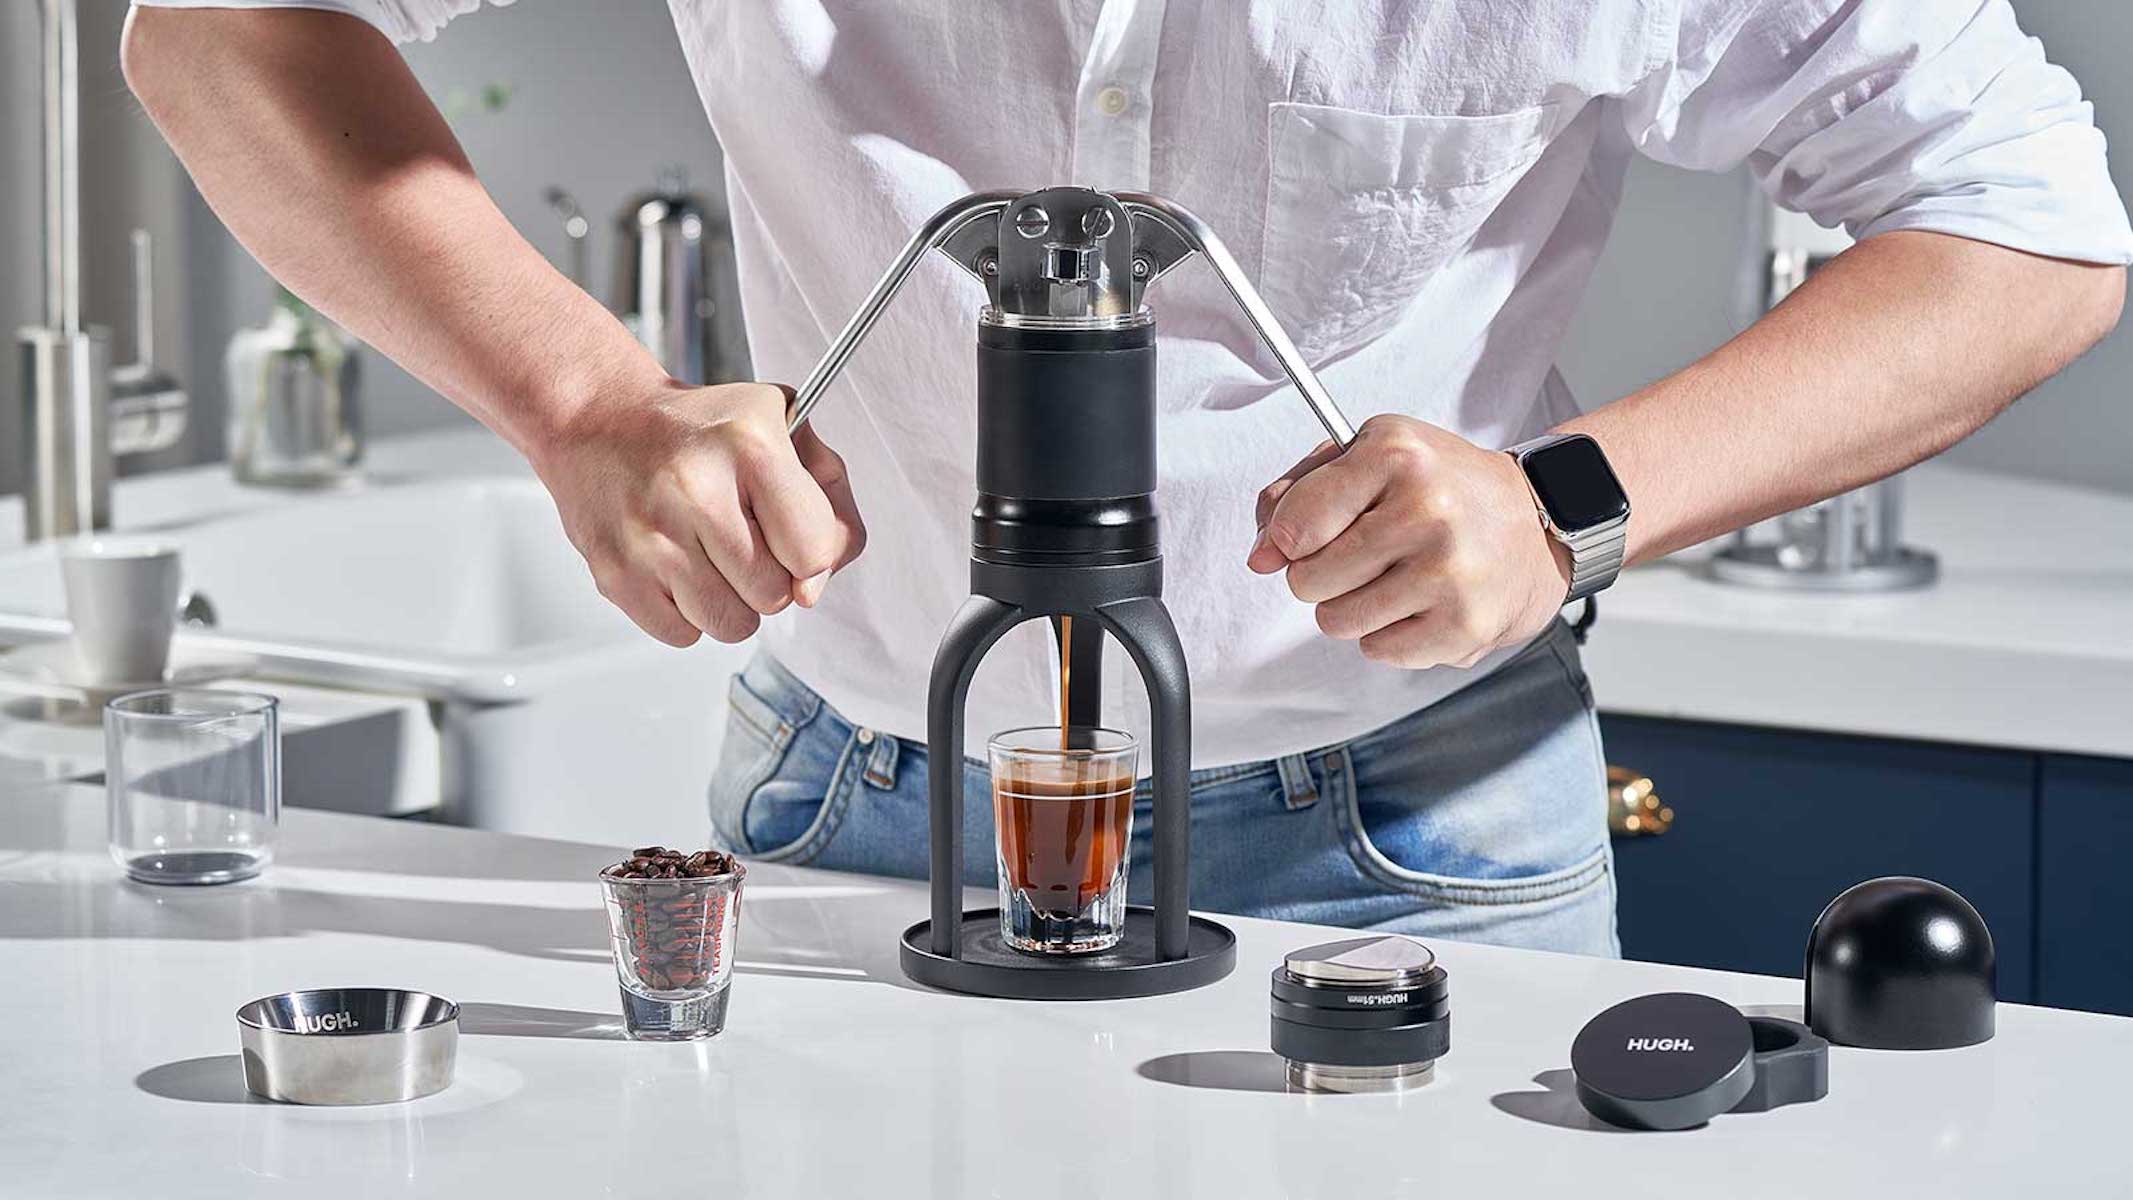 https://thegadgetflow.com/wp-content/uploads/2022/11/Must-have-coffee-gadgets-and-accessories-you-need-on-the-go-blog-featured.jpeg